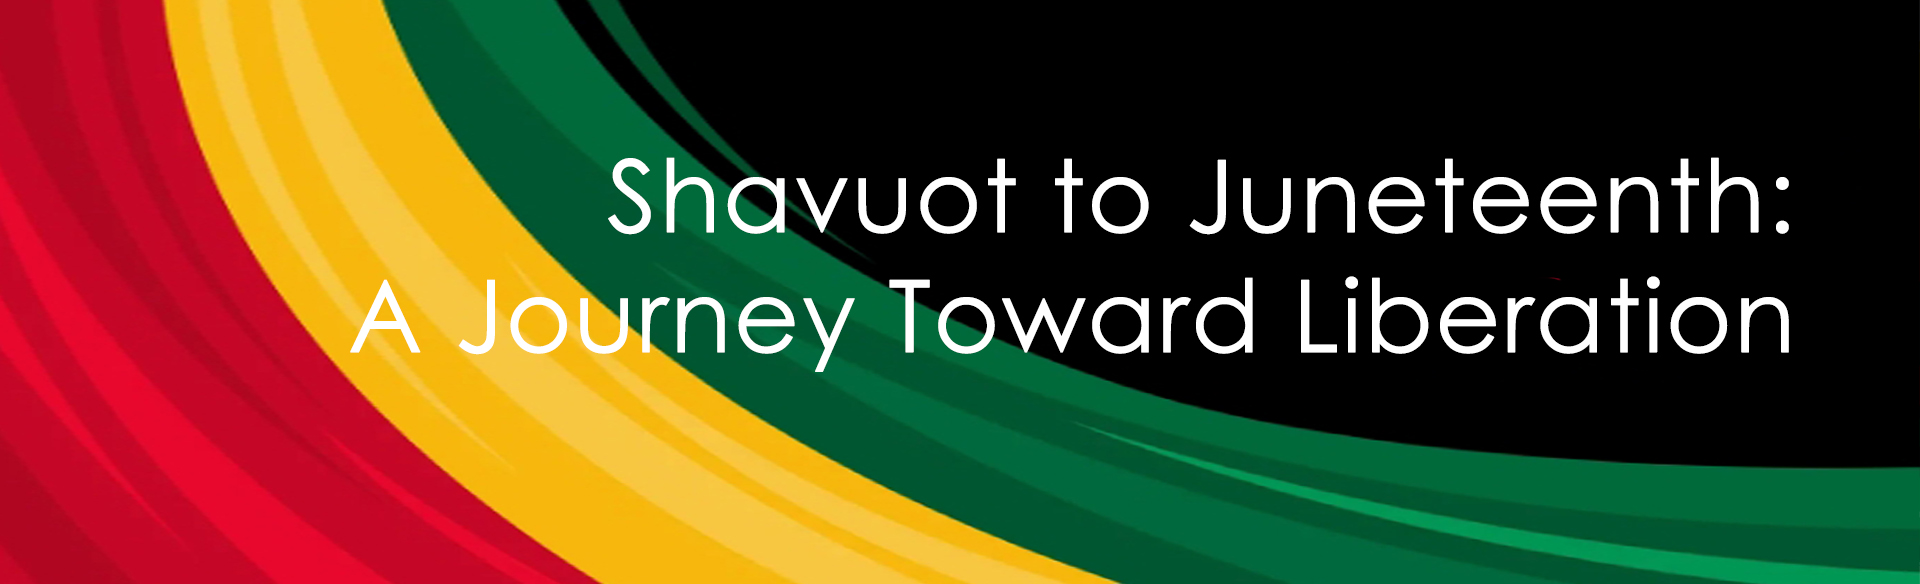 Shavuot to Juneteenth: A Journey Toward Liberation